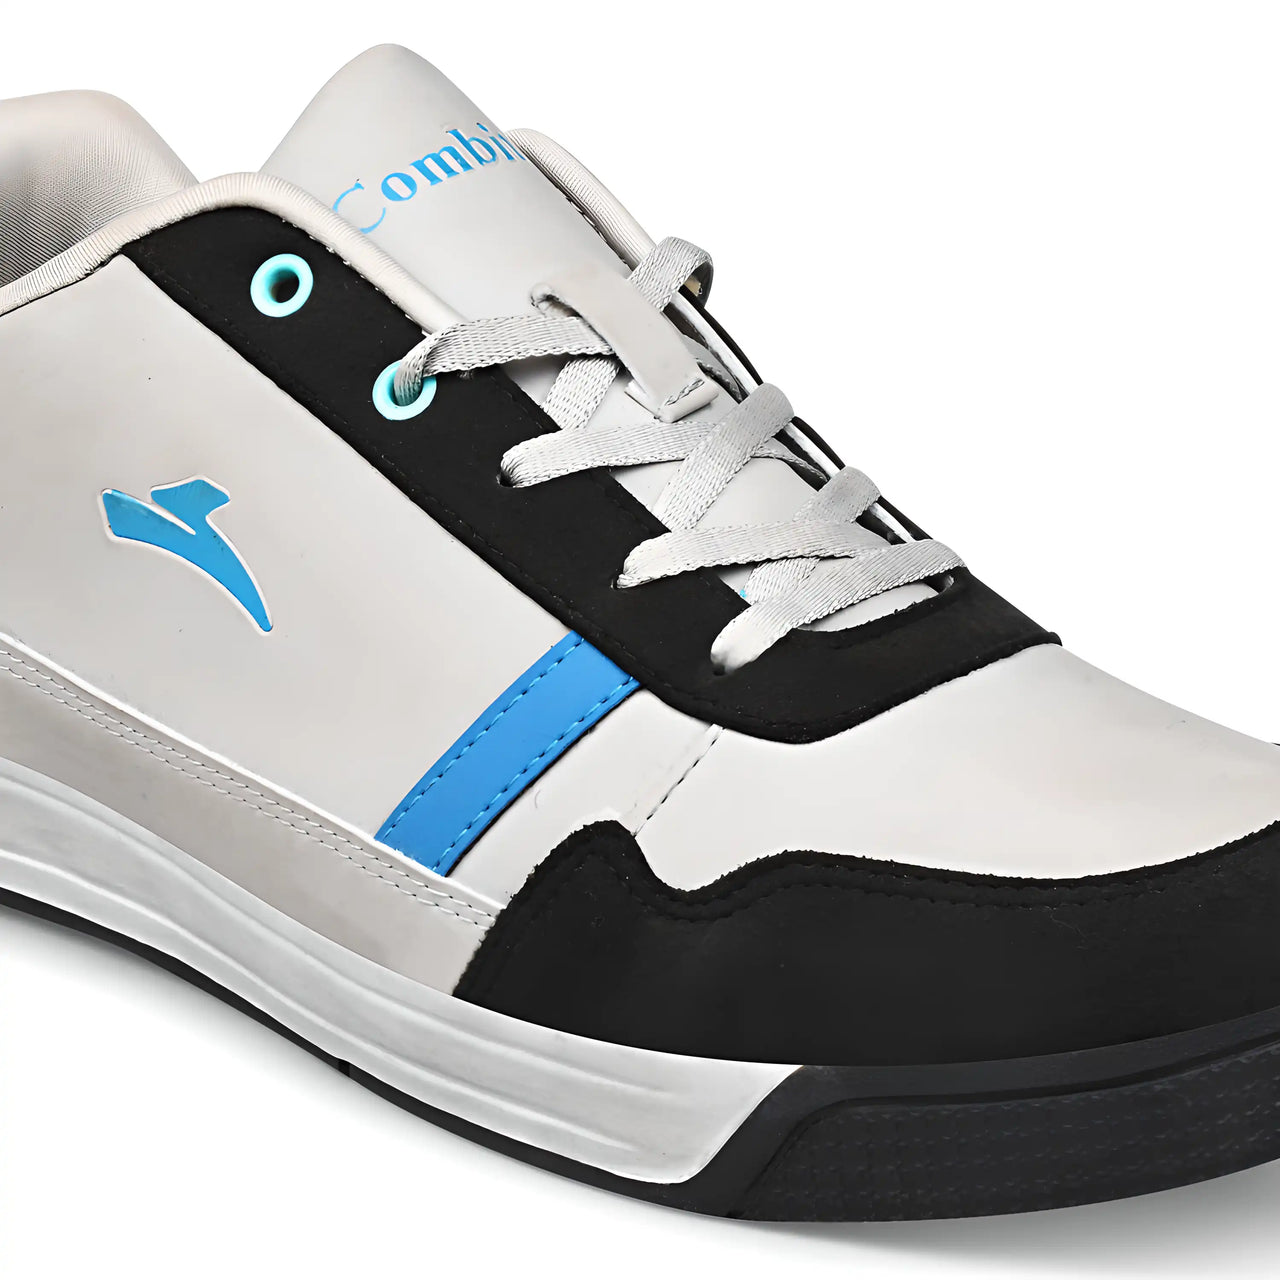 Men's Synthetic Stylish Sports Shoes